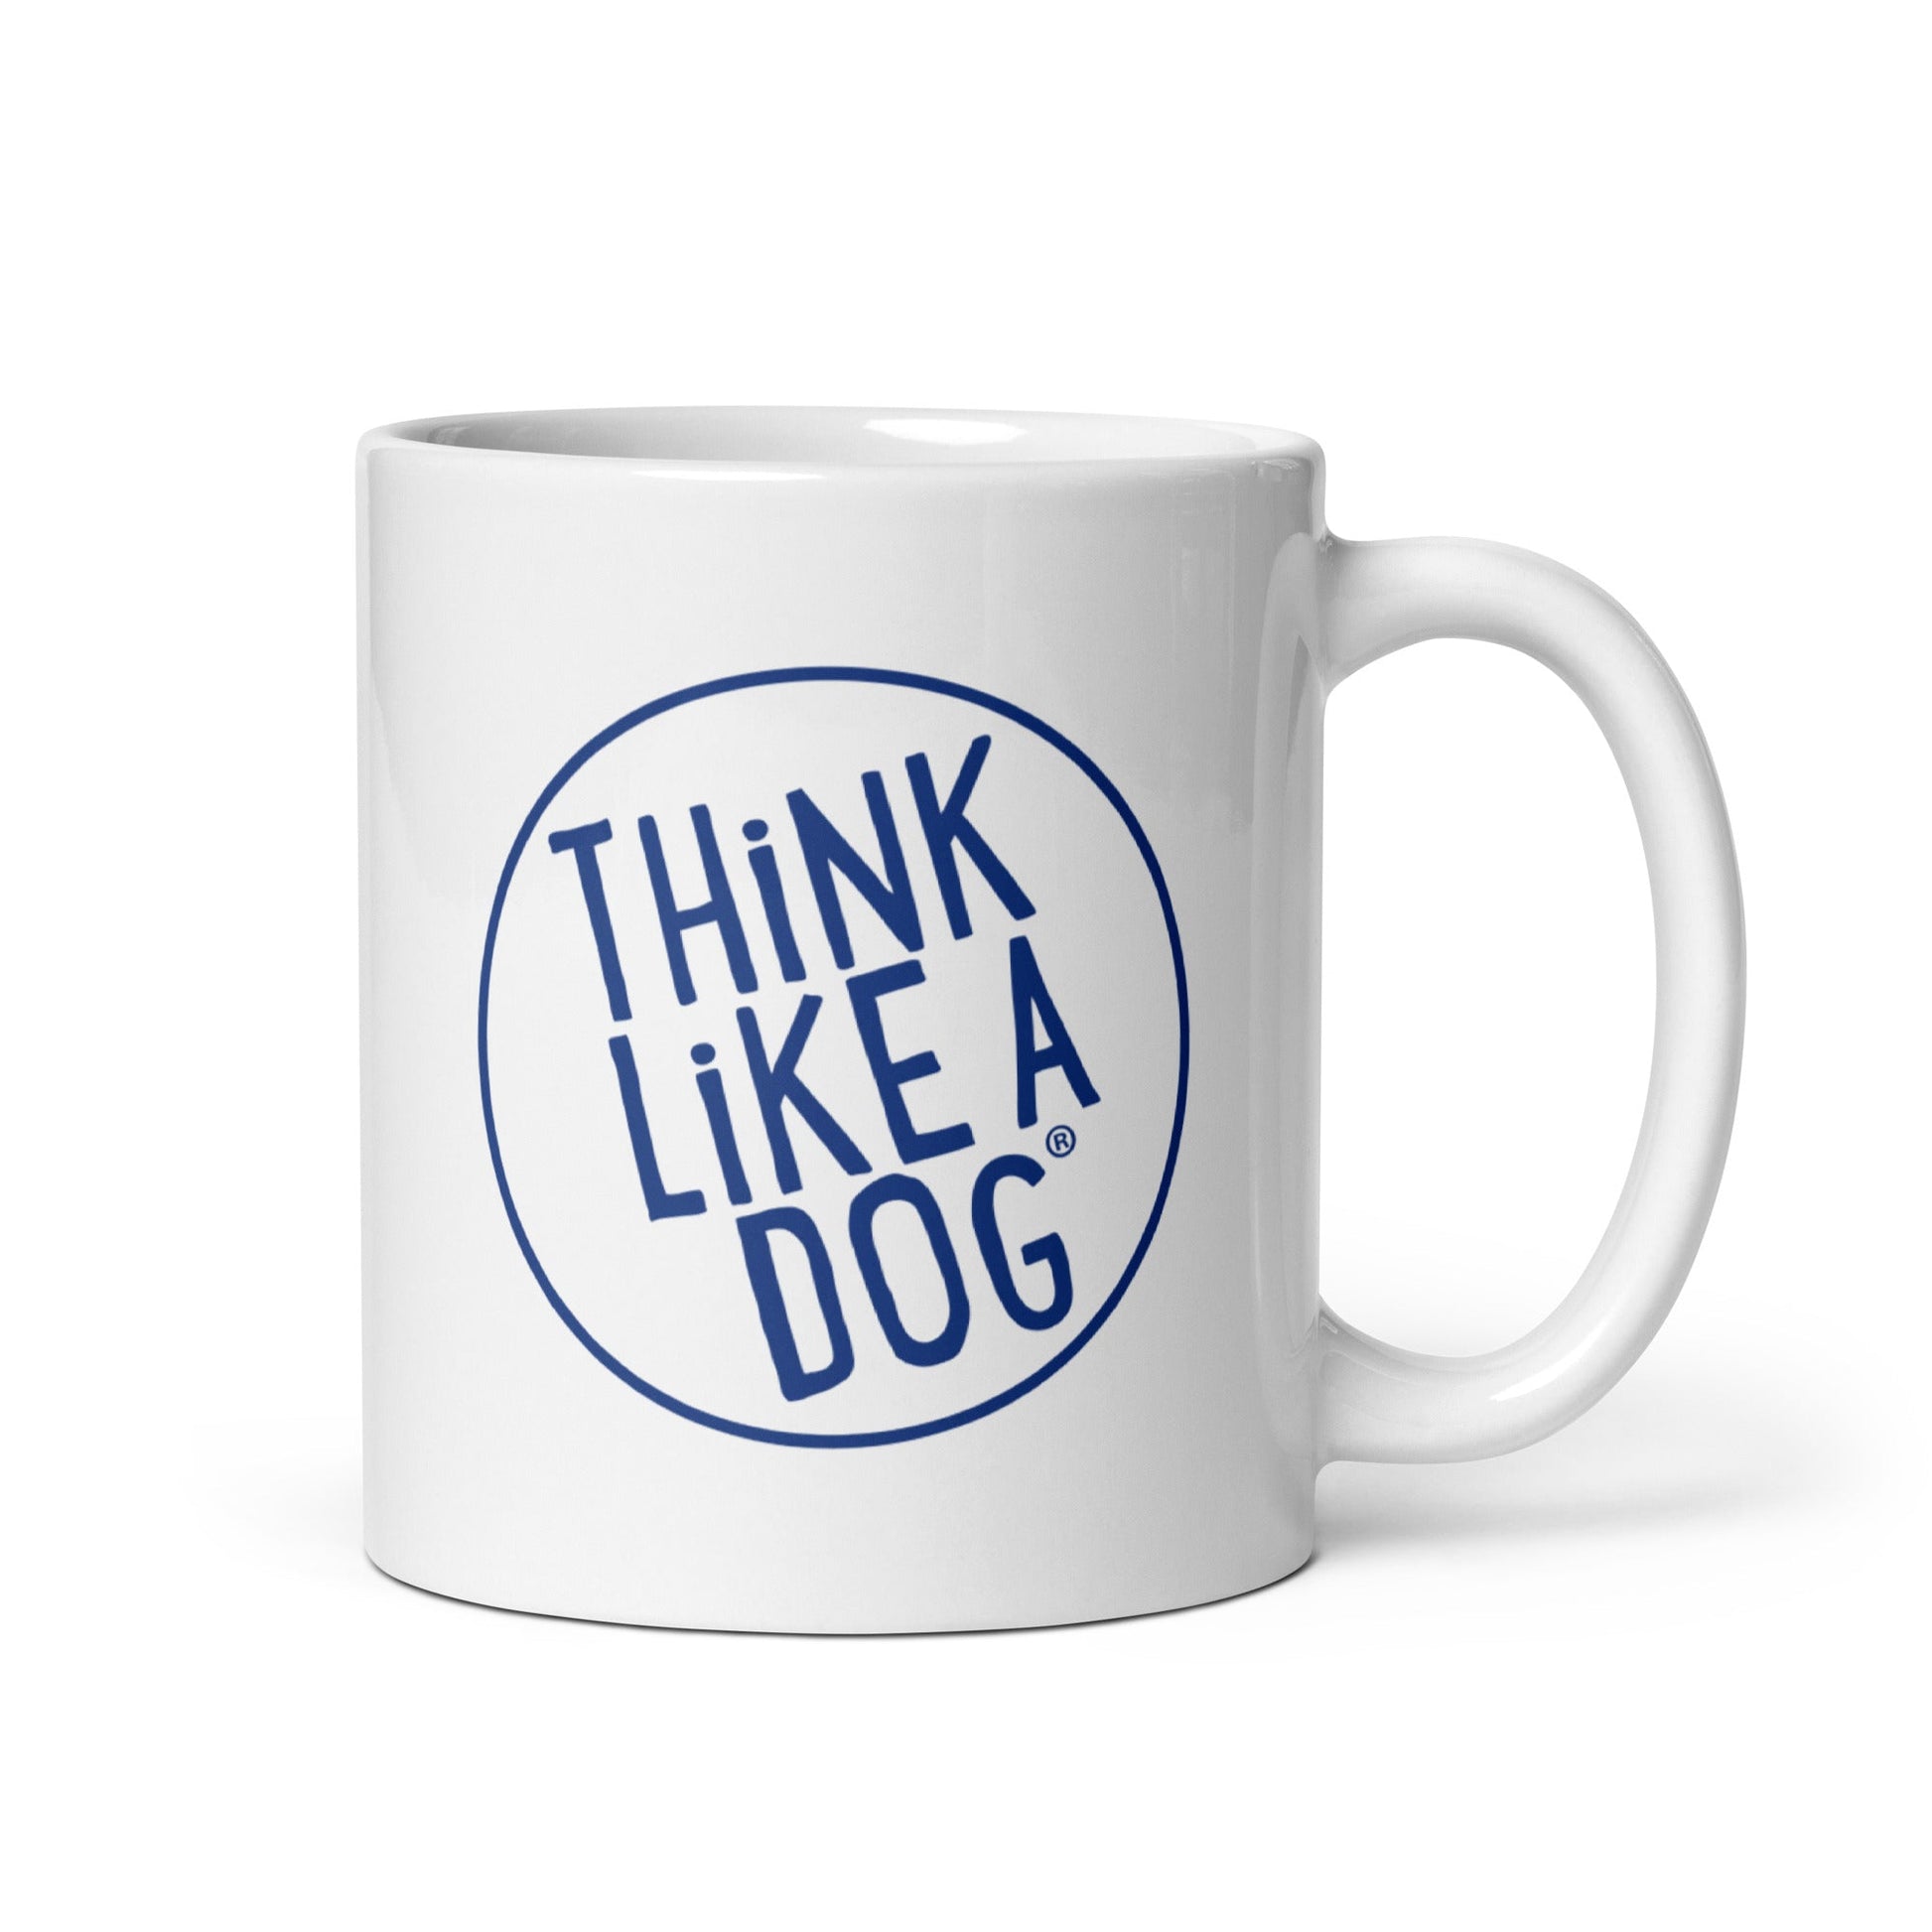 A THiNK LiKE A DOG® white glossy mug with the "THiNK LiKE A DOG®" text printed in a blue circle, perfect for dog lovers.